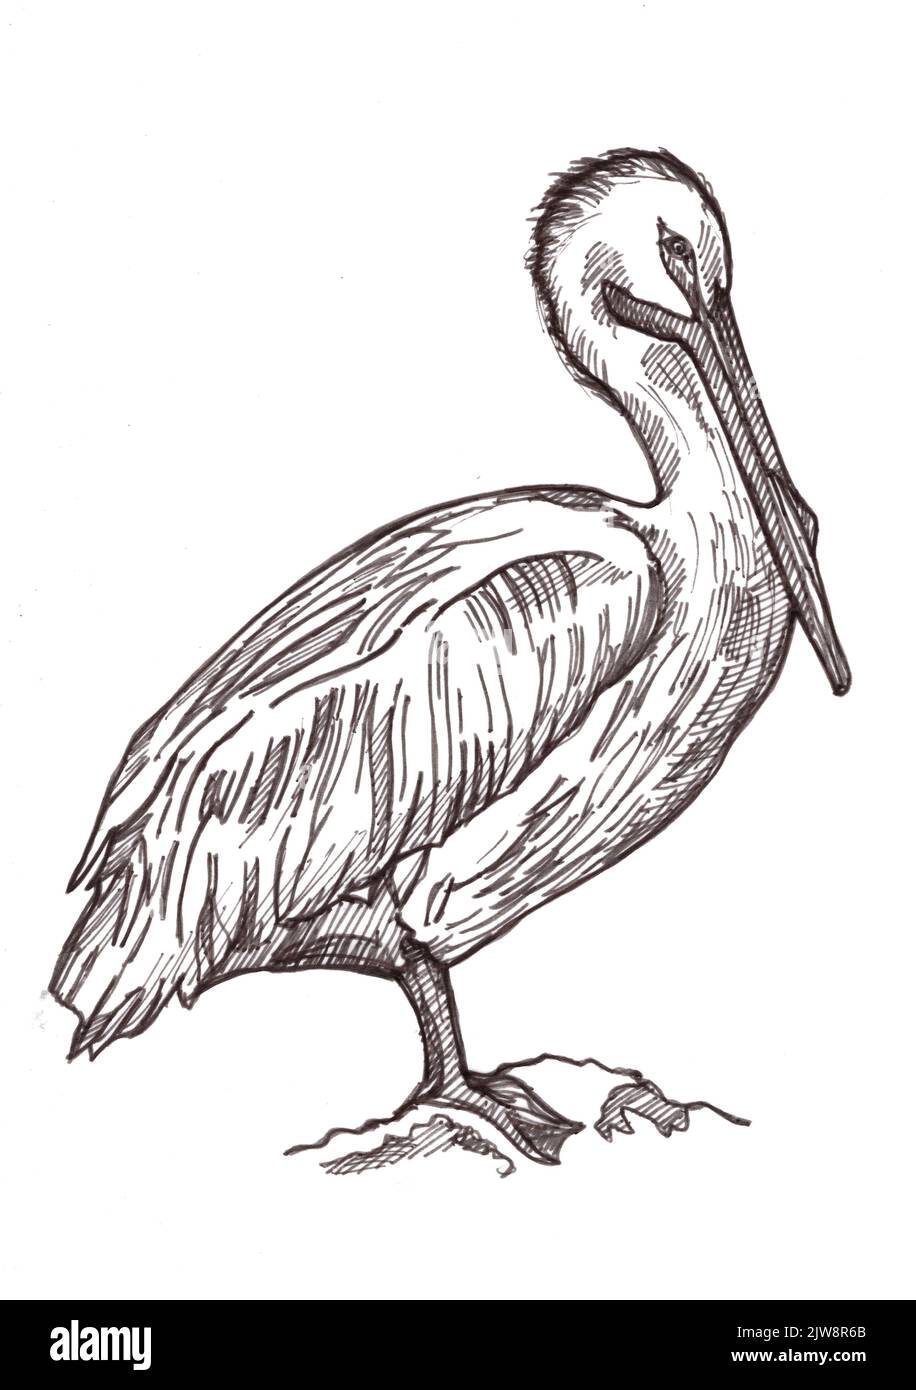 Black and white illustration of a pelican on a white background. Stock Photo